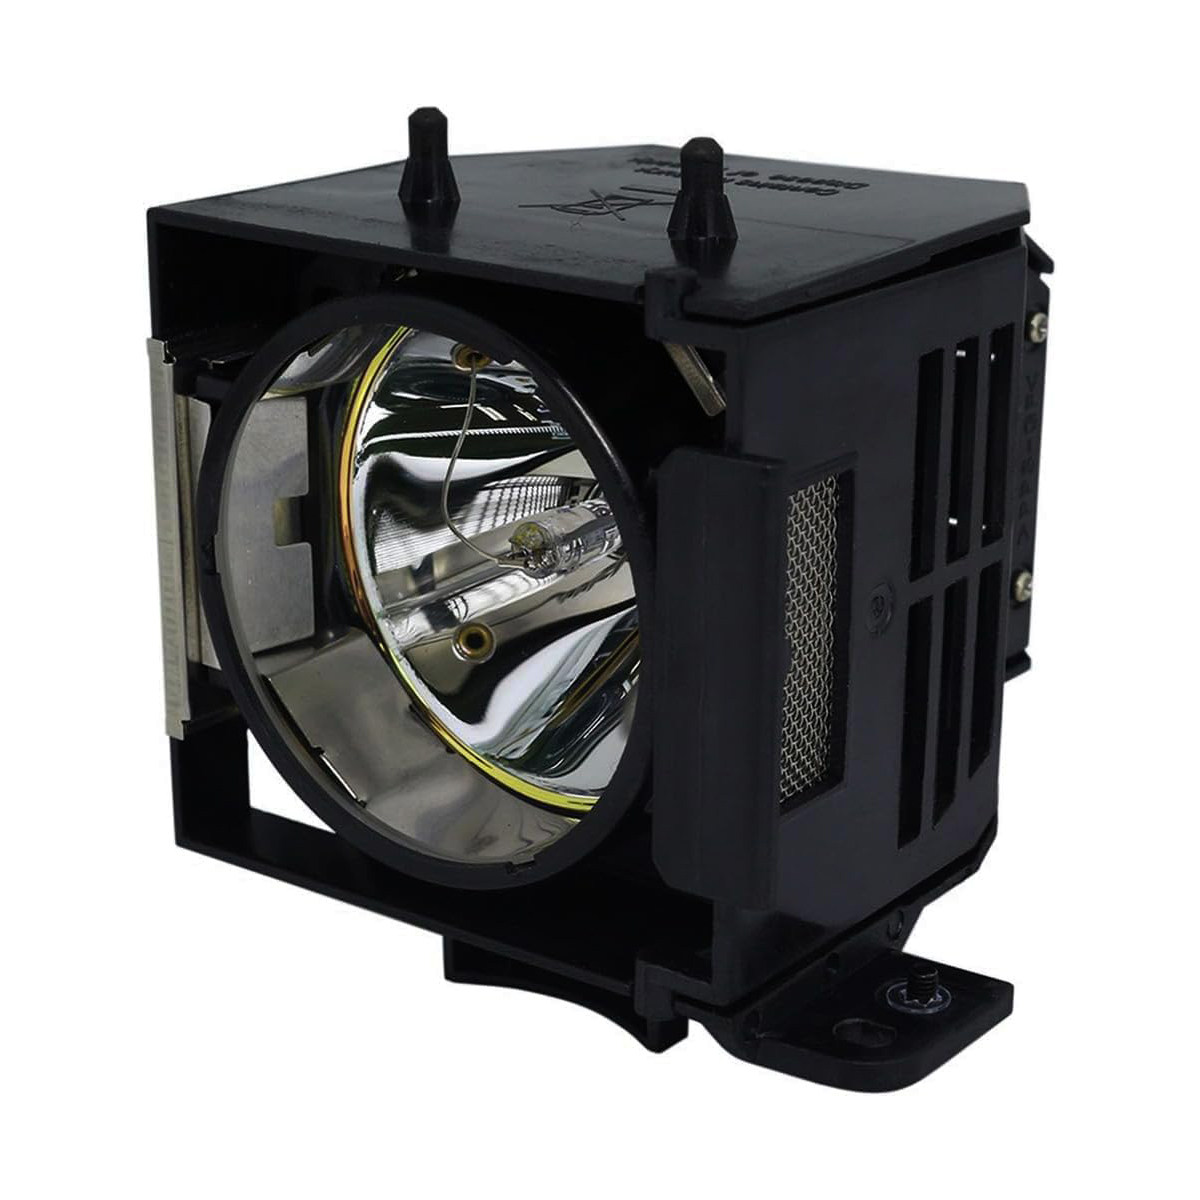 Replacement Projector lamp ELPLP30 For Epson EMP-61/ EMP-81/EMP-81+ EMP-821